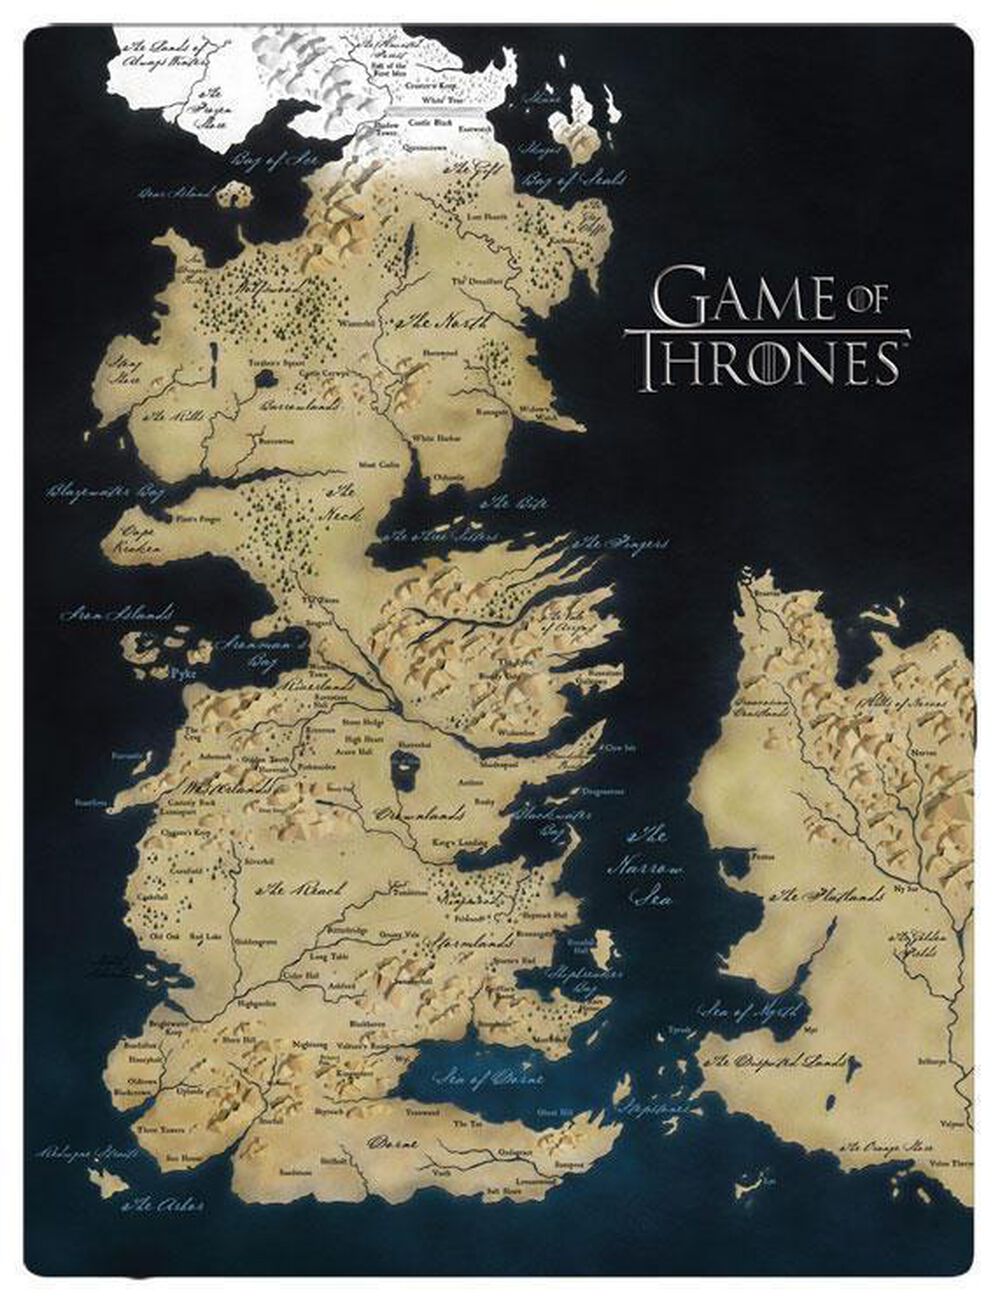 A map of Westeros from Game of Thrones